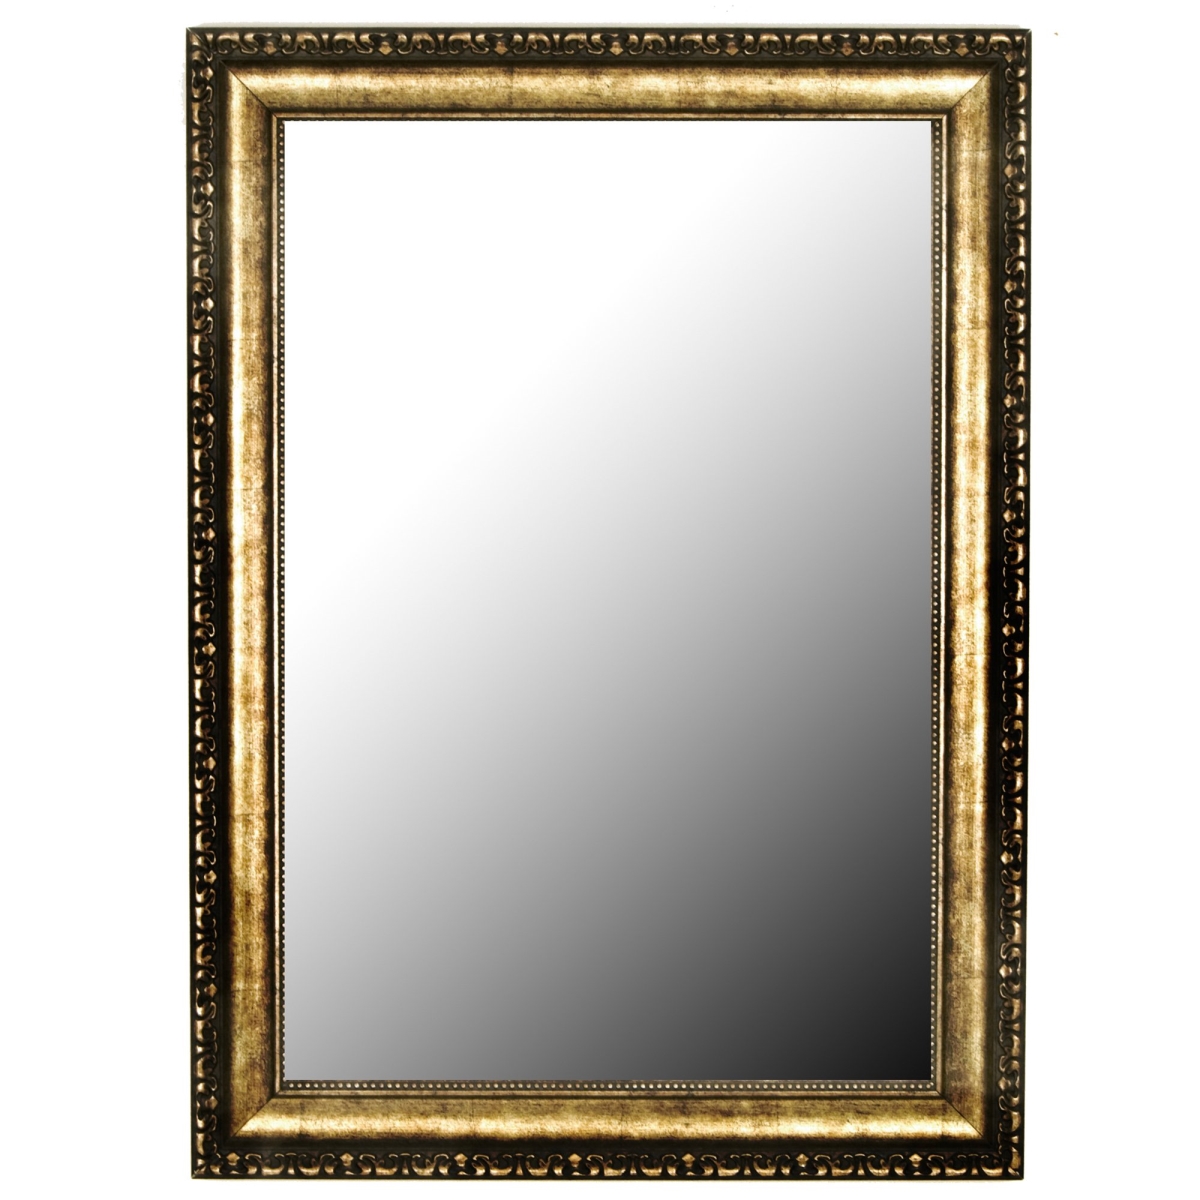 Hitchcock Butterfield 810703 Gold Lavonne Wall Mirror - 36.25 X 46.25 In.